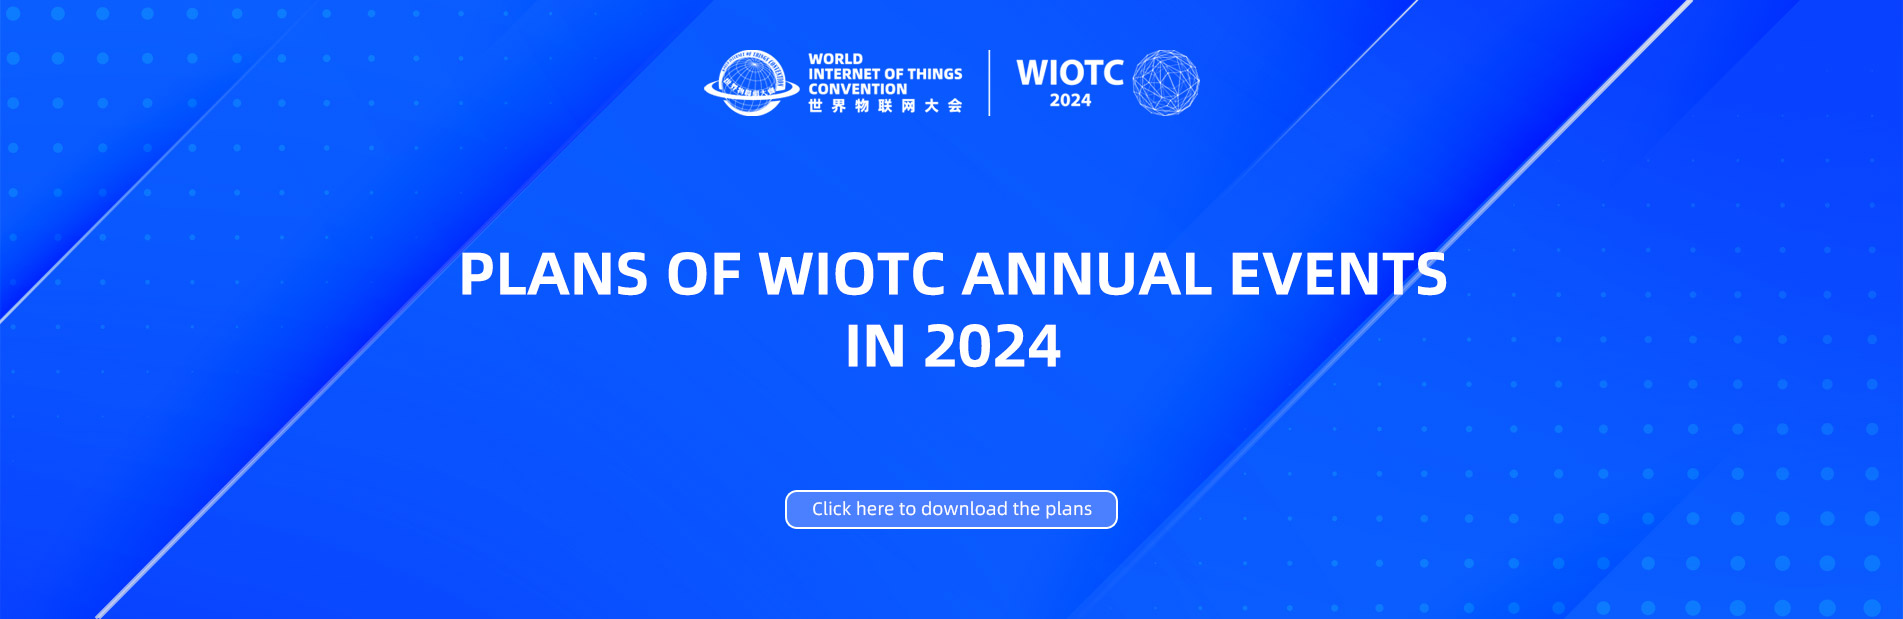 Click here to download the plans of WIOTC Annual Events in 2024